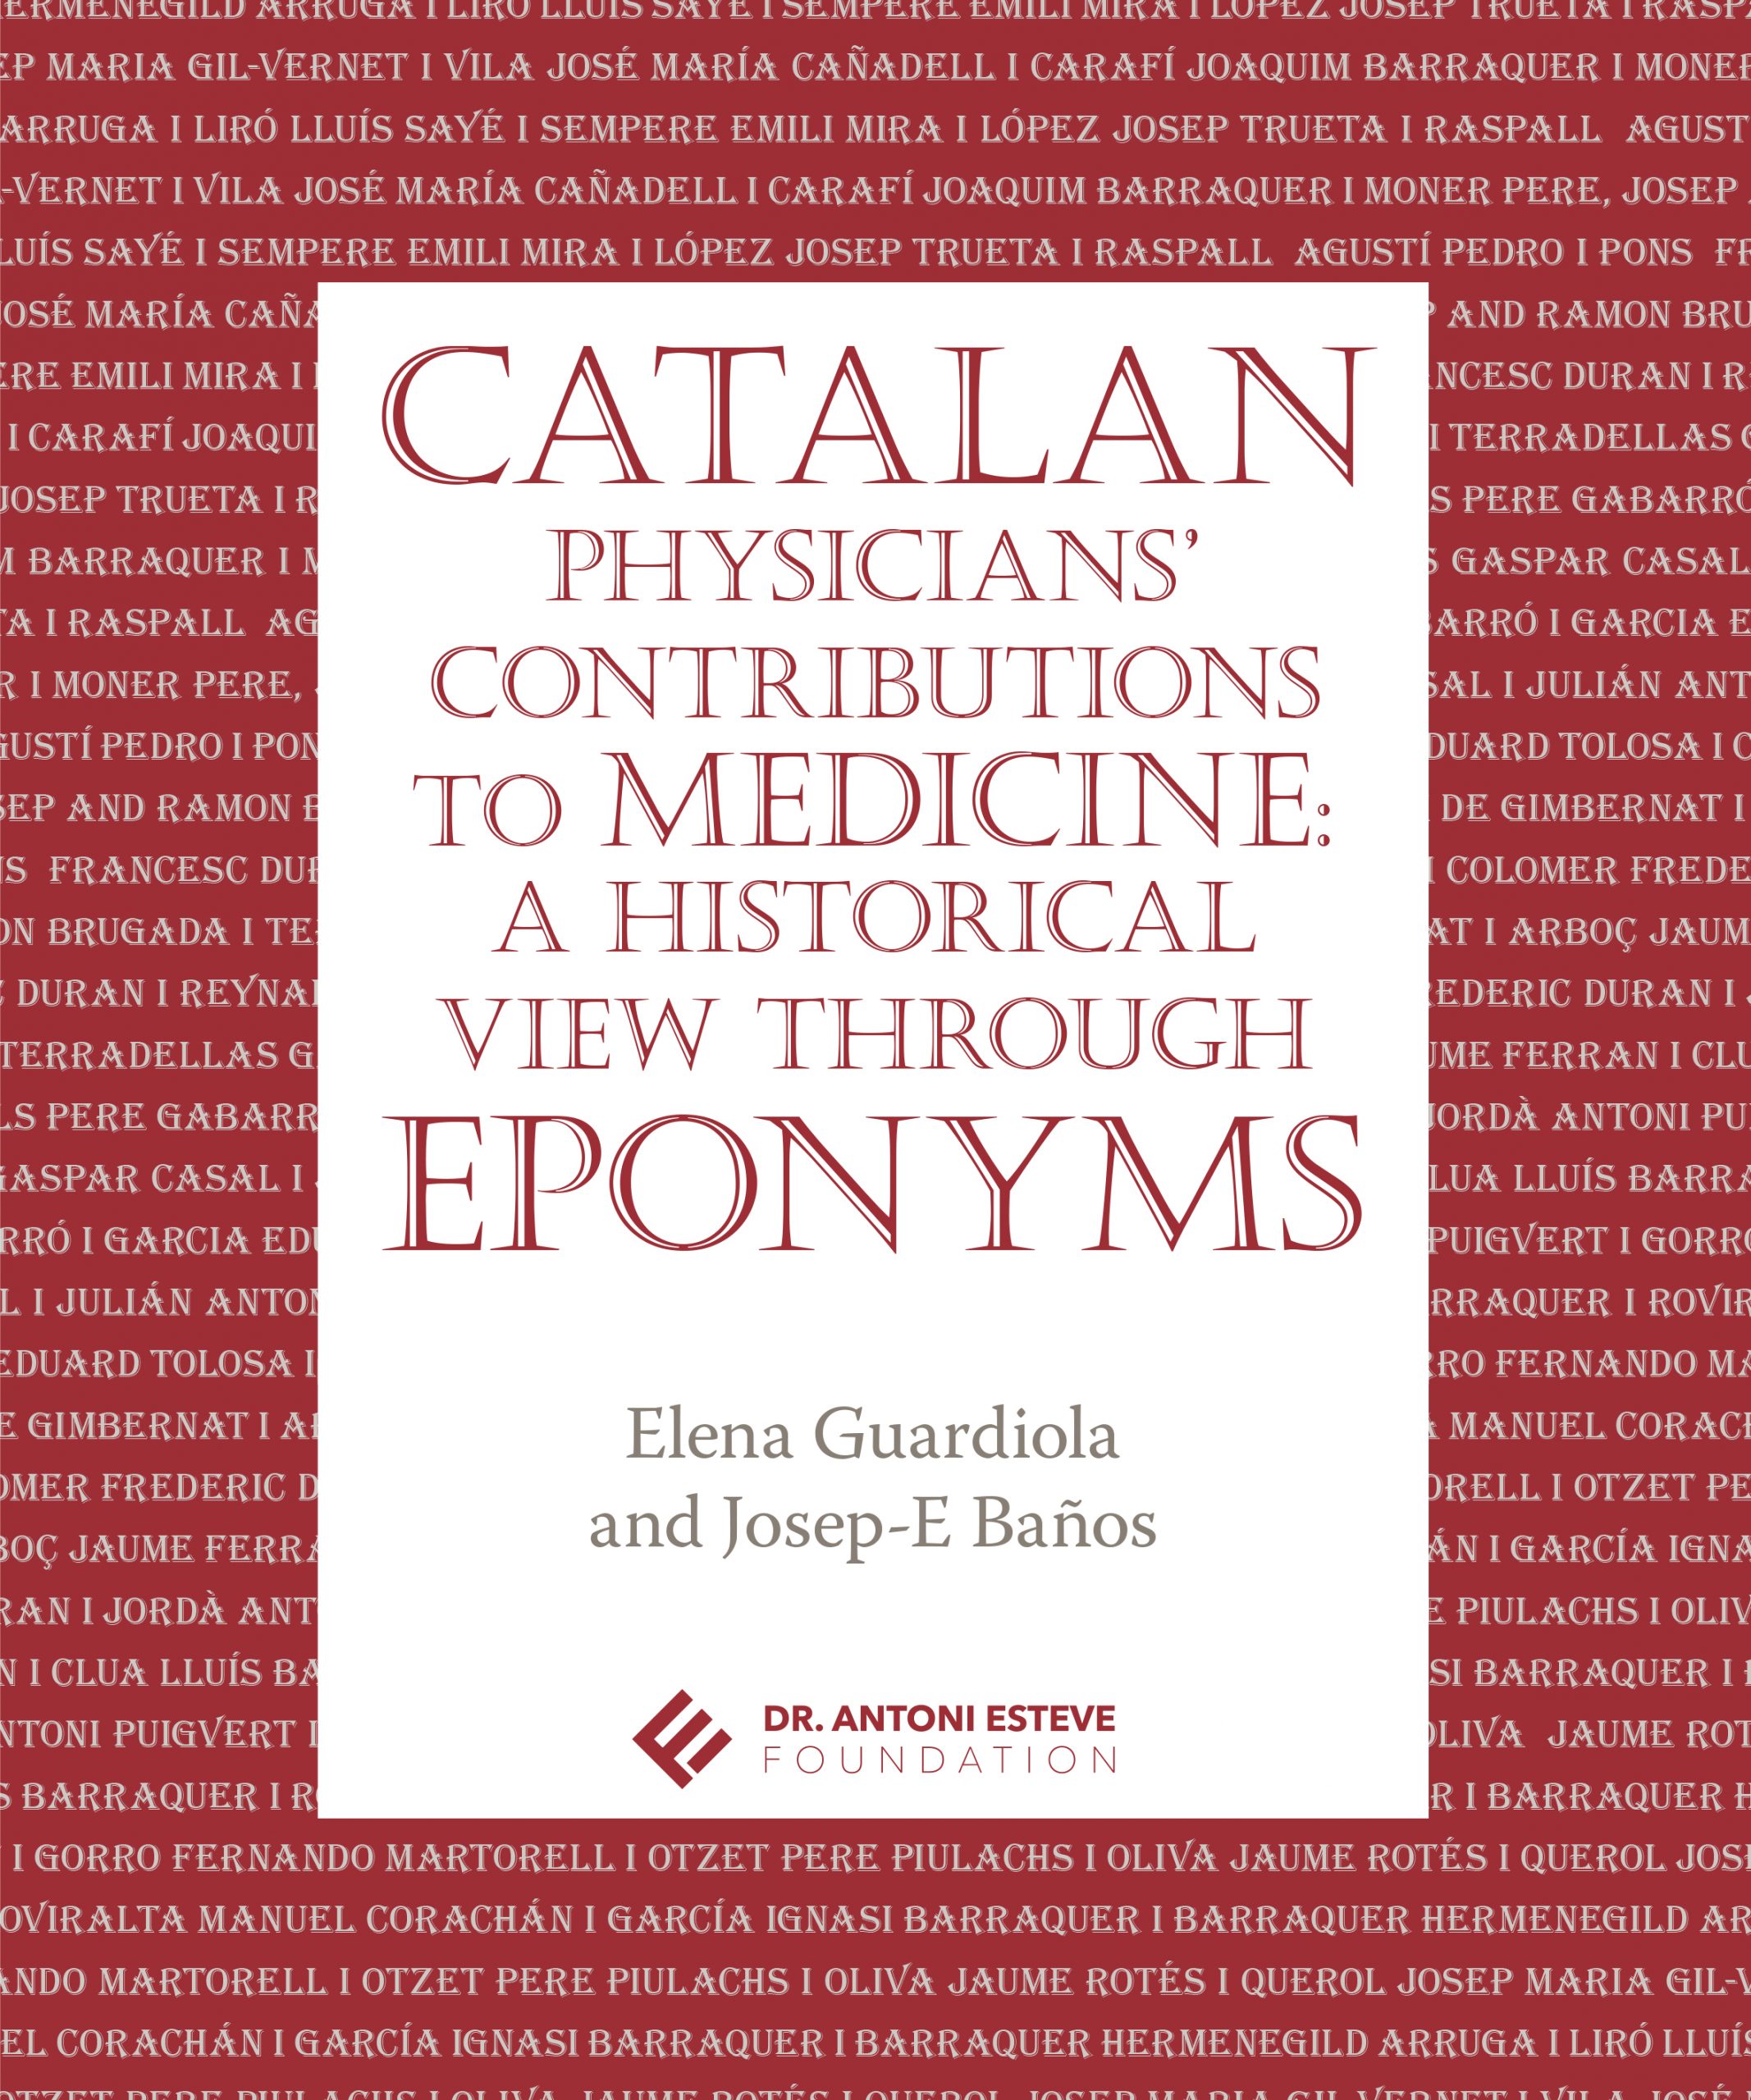 Catalan physicians’ contributions to medicine: A historical view through eponyms